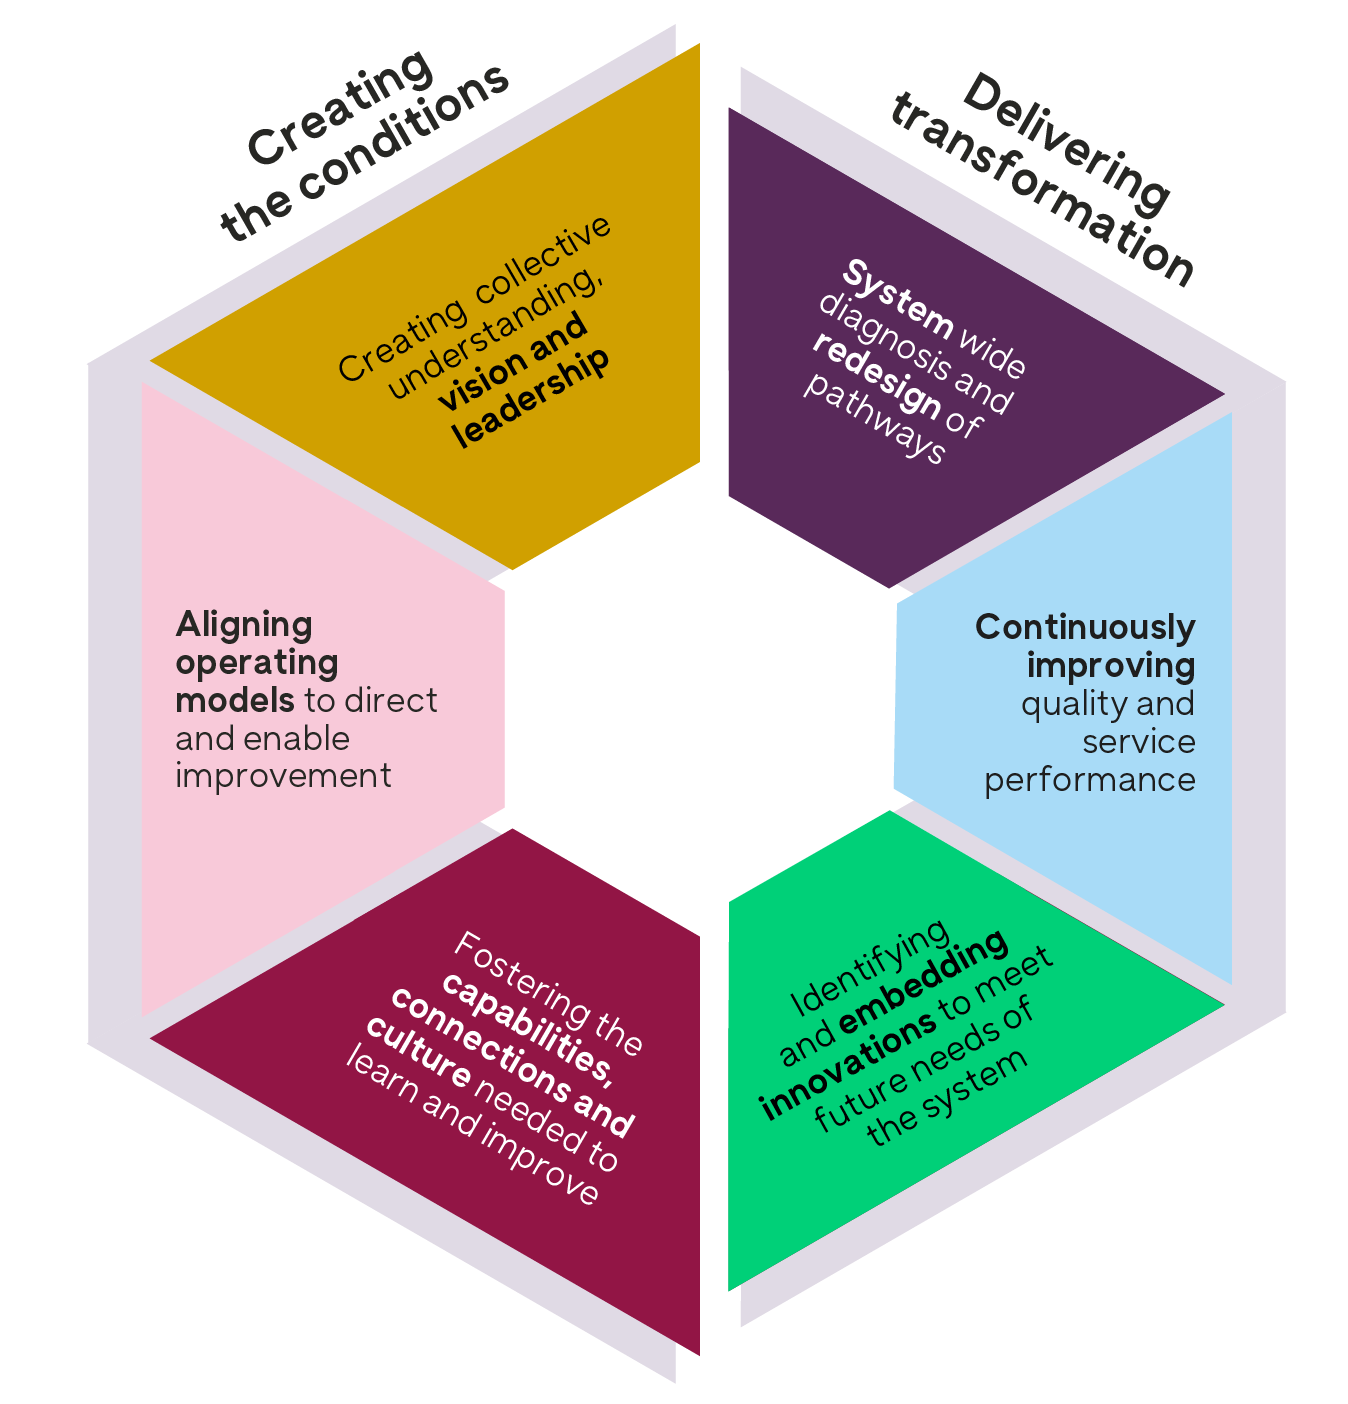 A simplified version of the cross system improvement framework